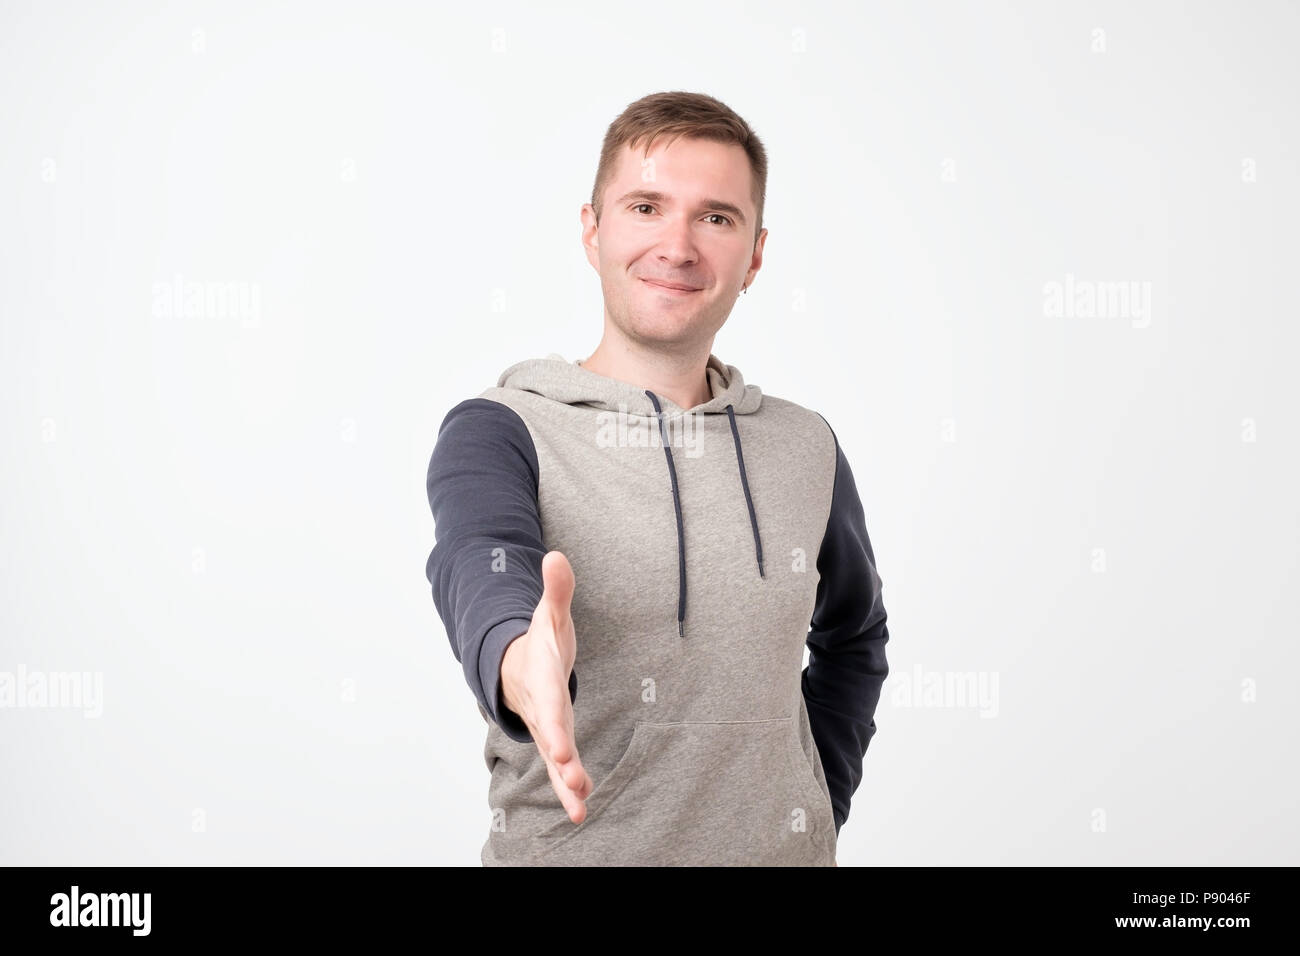 Handsome young man stretching out hand for shaking. Stock Photo